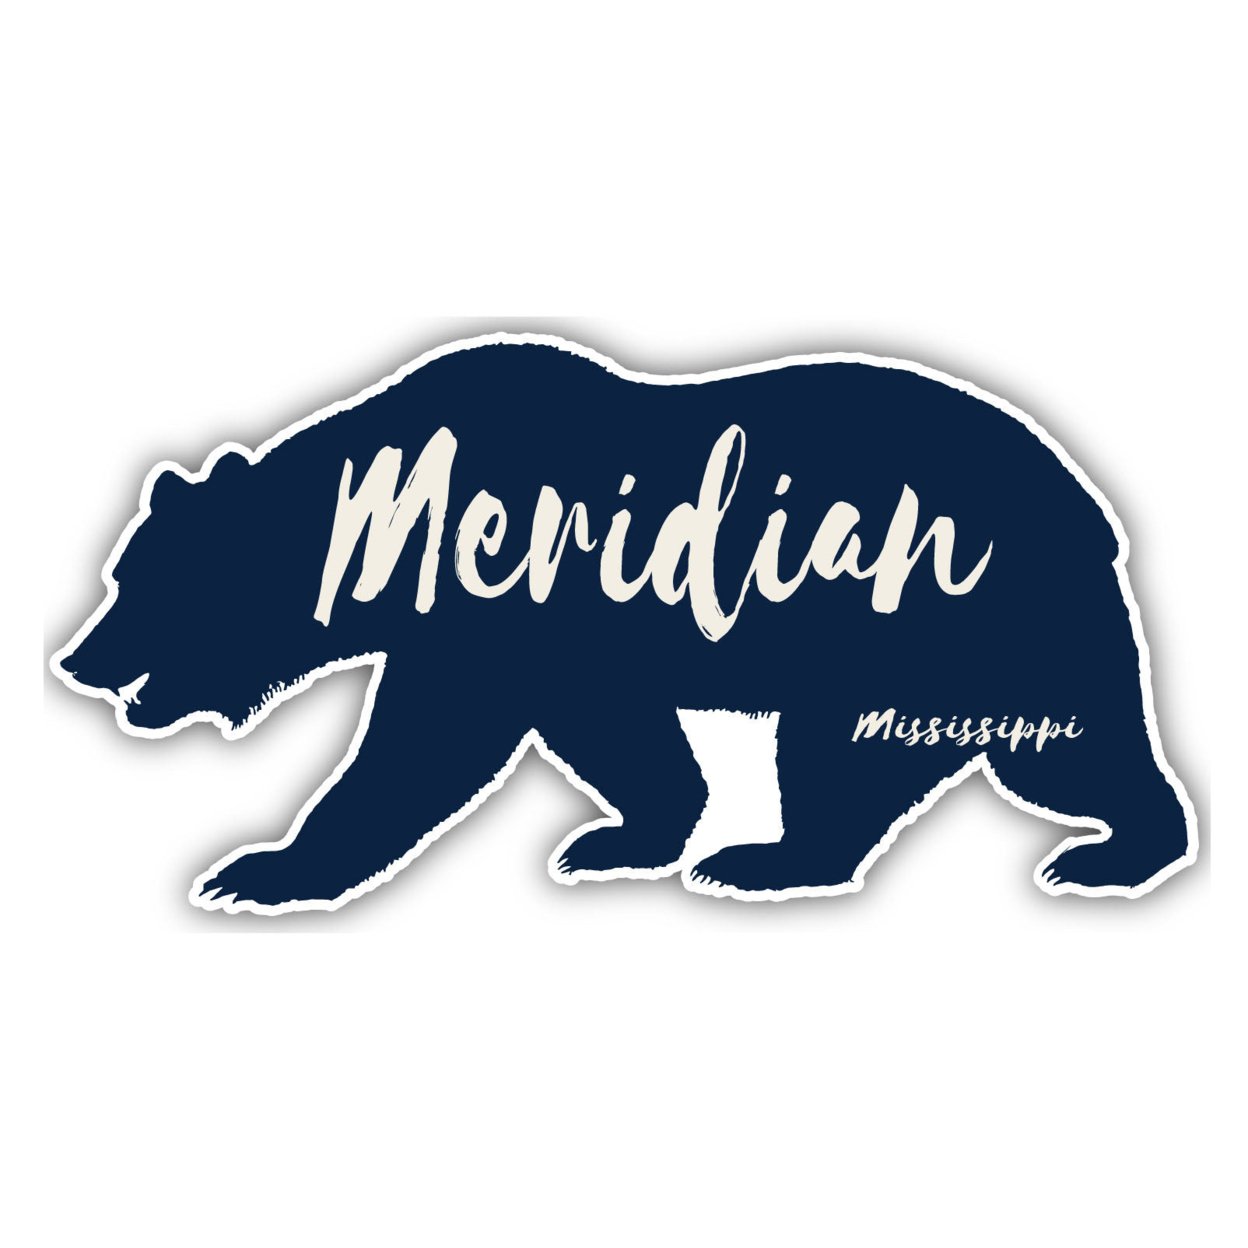 Meridian Mississippi Souvenir Decorative Stickers (Choose Theme And Size) - 4-Inch, Bear